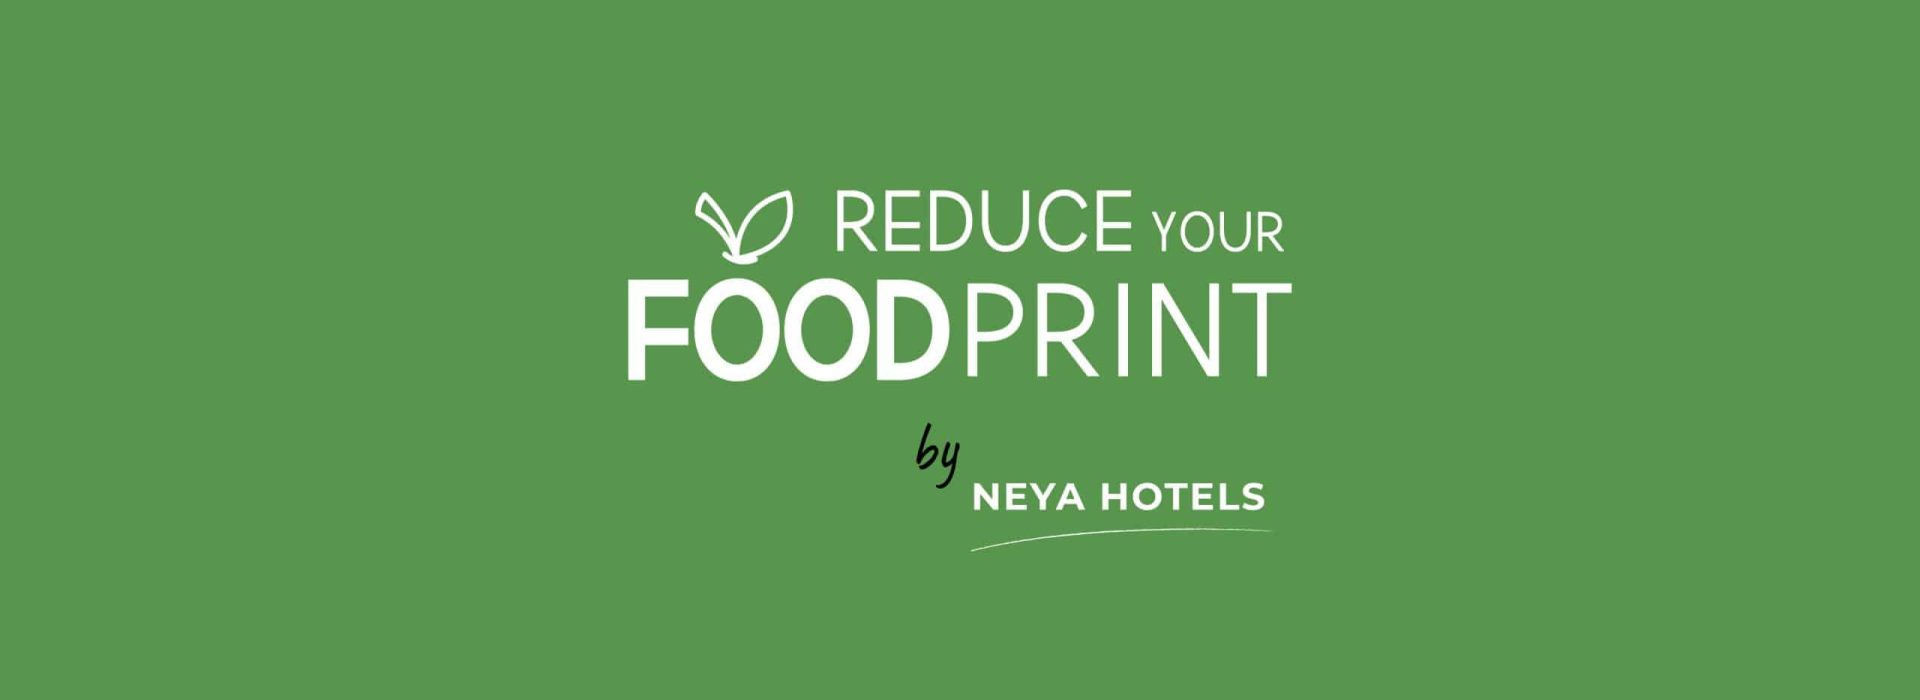 nh-reduce-your-foodprint